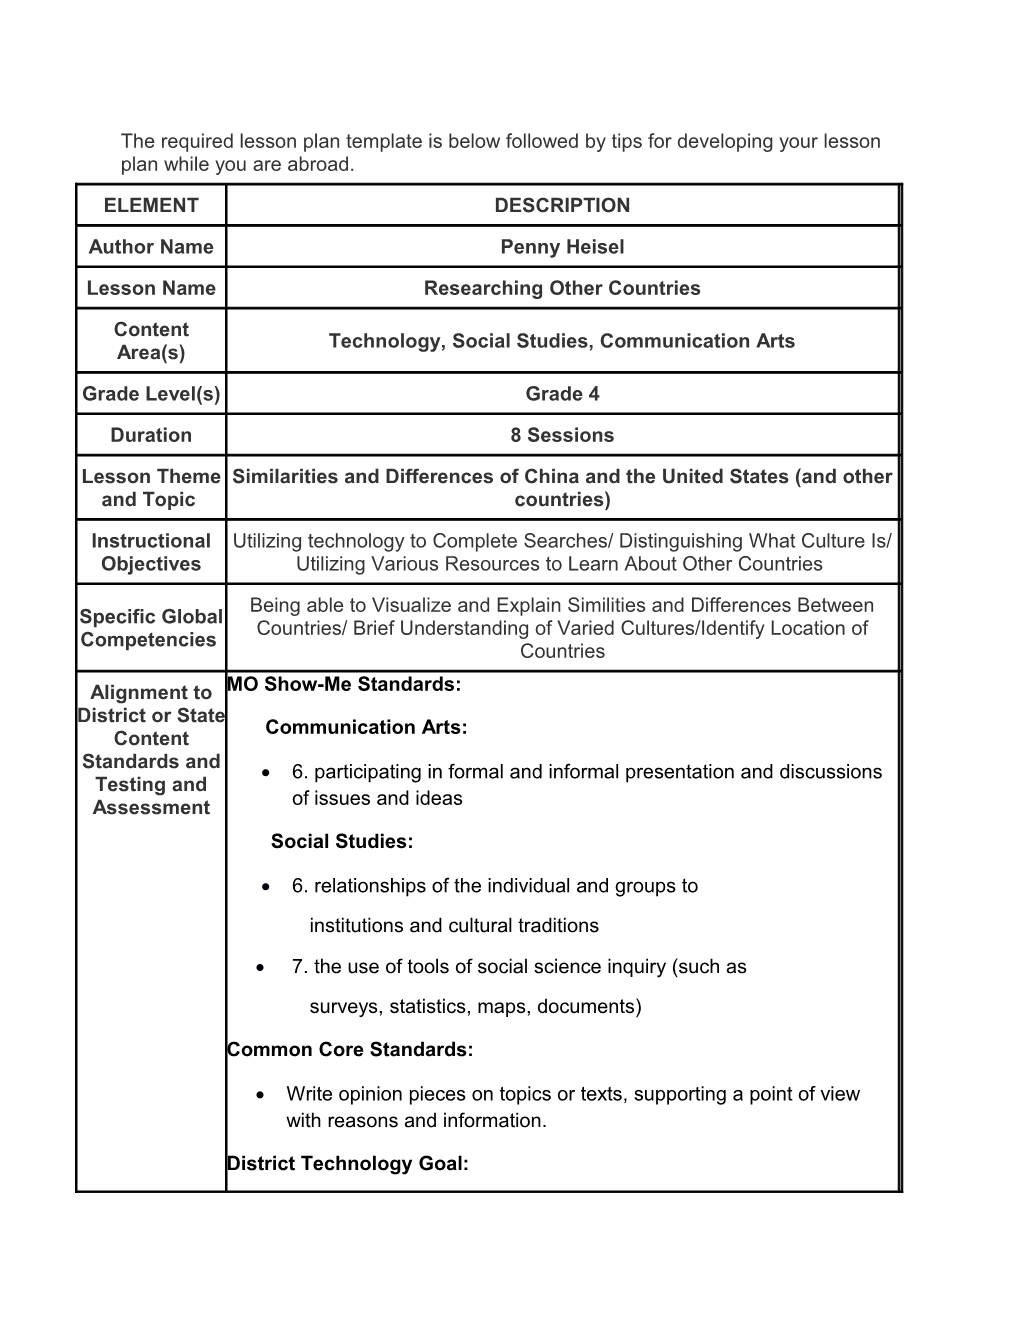 The Required Lesson Plan Template Is Below Followed by Tips for Developing Your Lesson